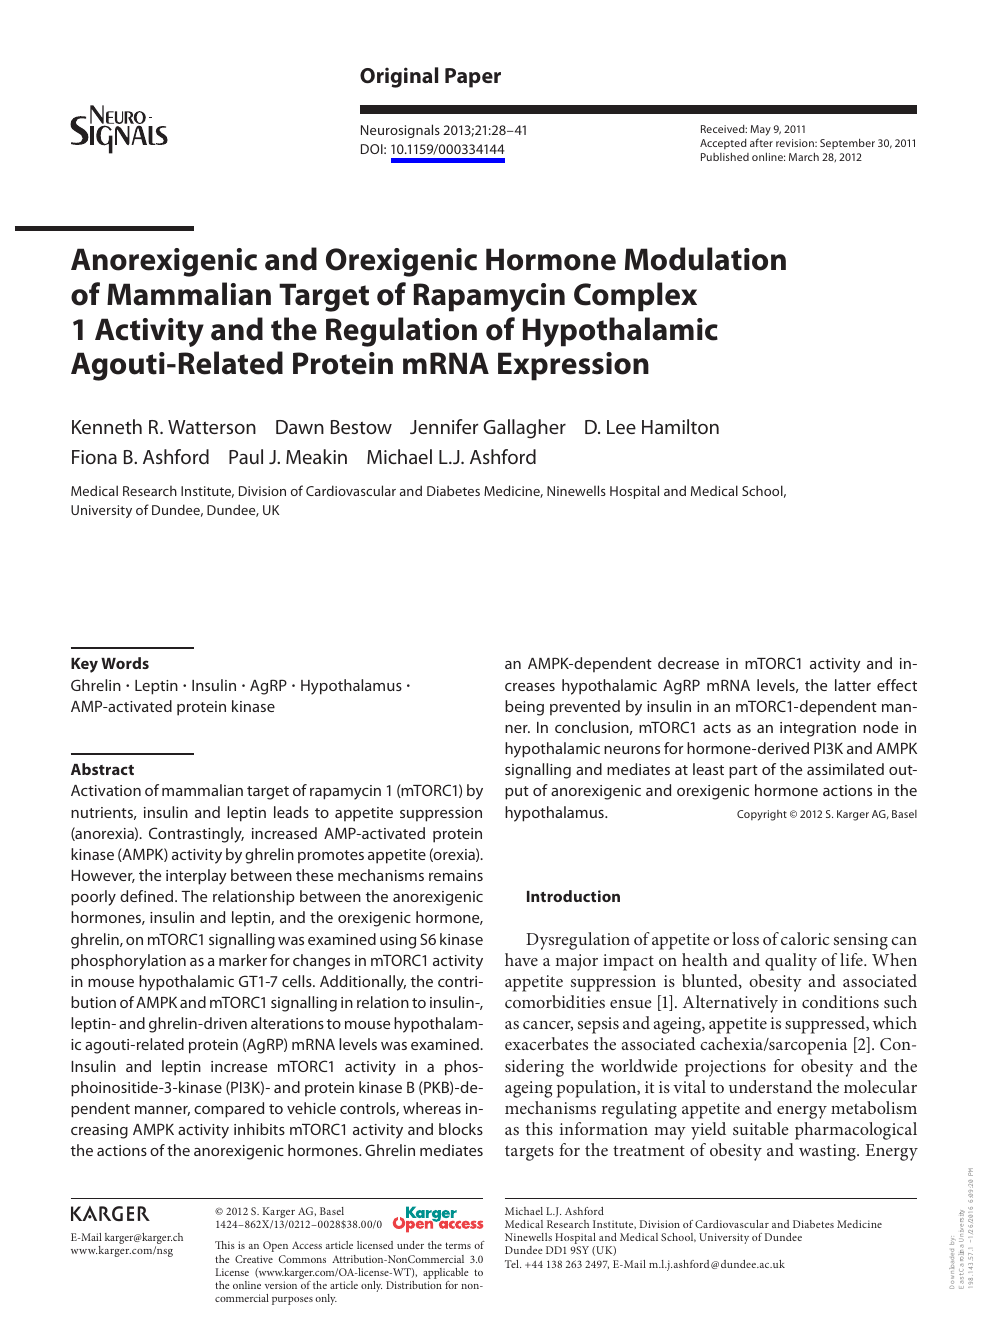 Anorexigenic And Orexigenic Hormone Modulation Of Mammalian Target Of Rapamycin Complex 1 Activity And The Regulation Of Hypothalamic Agouti Related Protein Mrna Expression Topic Of Research Paper In Biological Sciences Download Scholarly